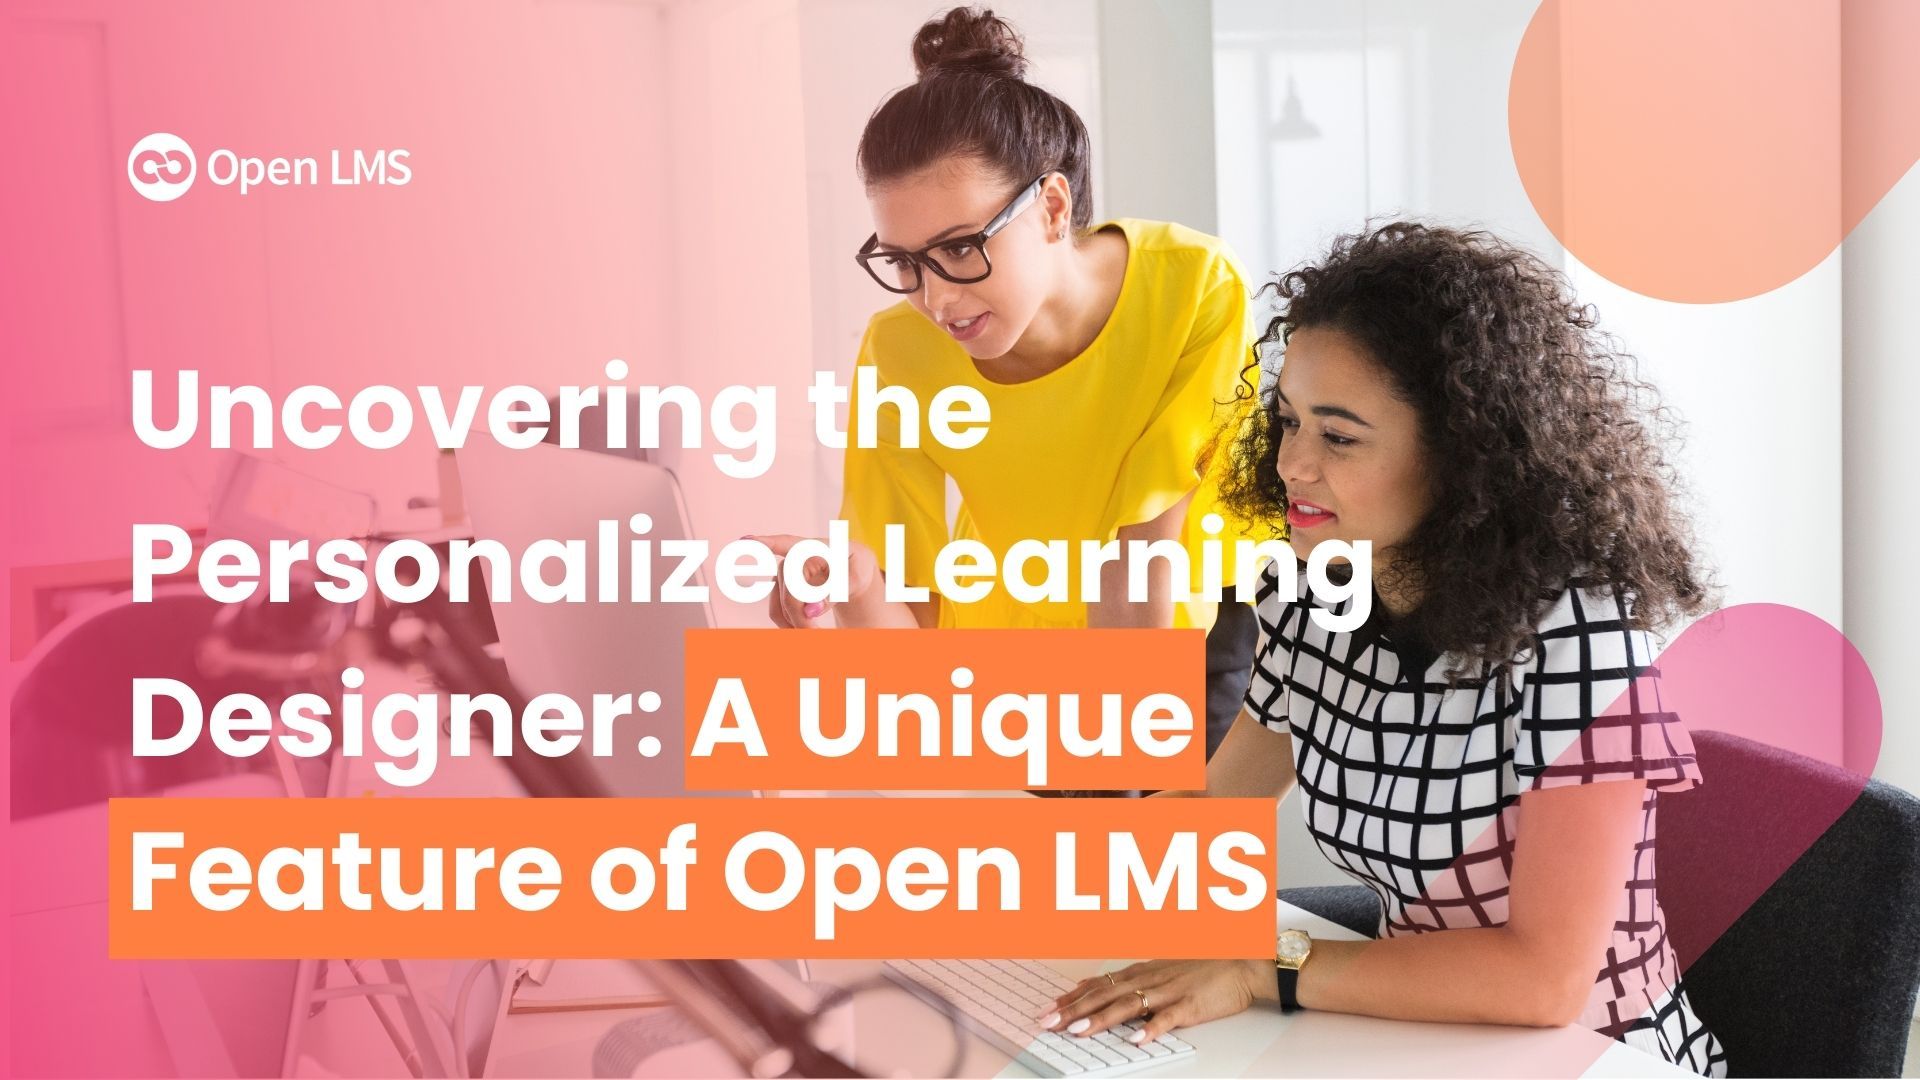 Uncovering the Personalized Learning Designer: A Unique Feature of Open LMS